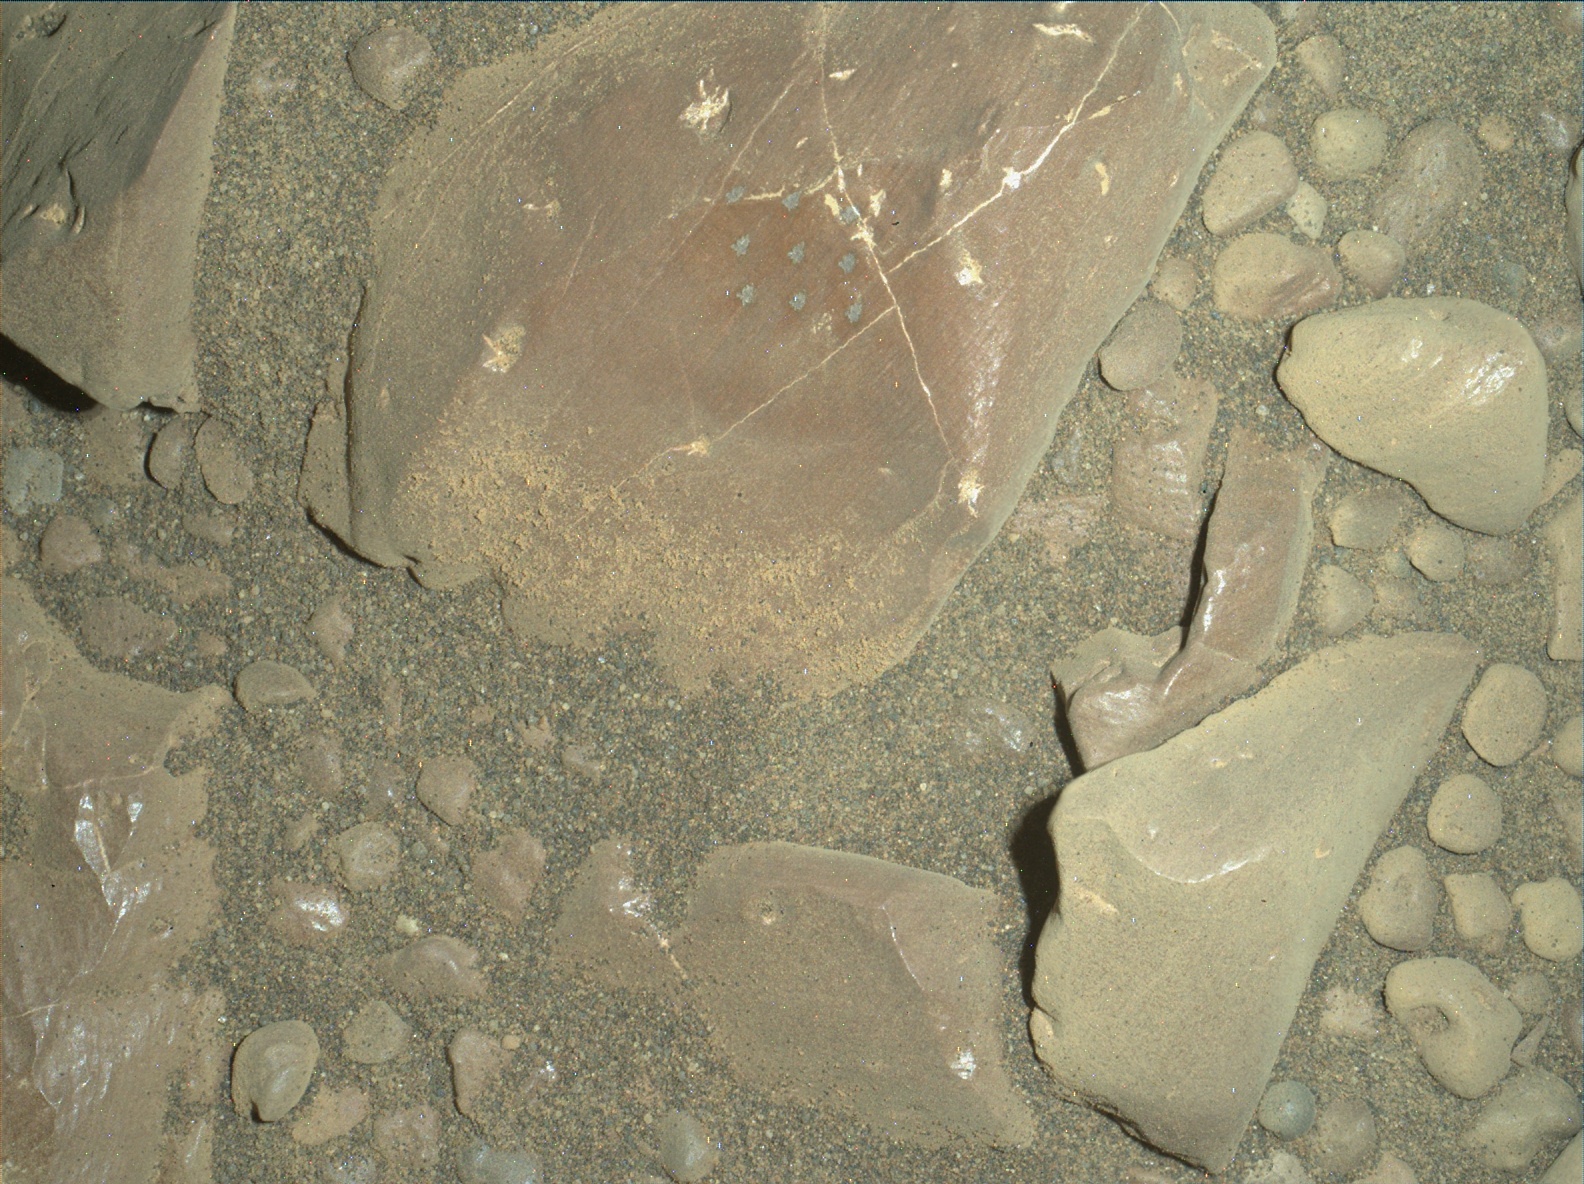 Nasa's Mars rover Curiosity acquired this image using its Mars Hand Lens Imager (MAHLI) on Sol 1962